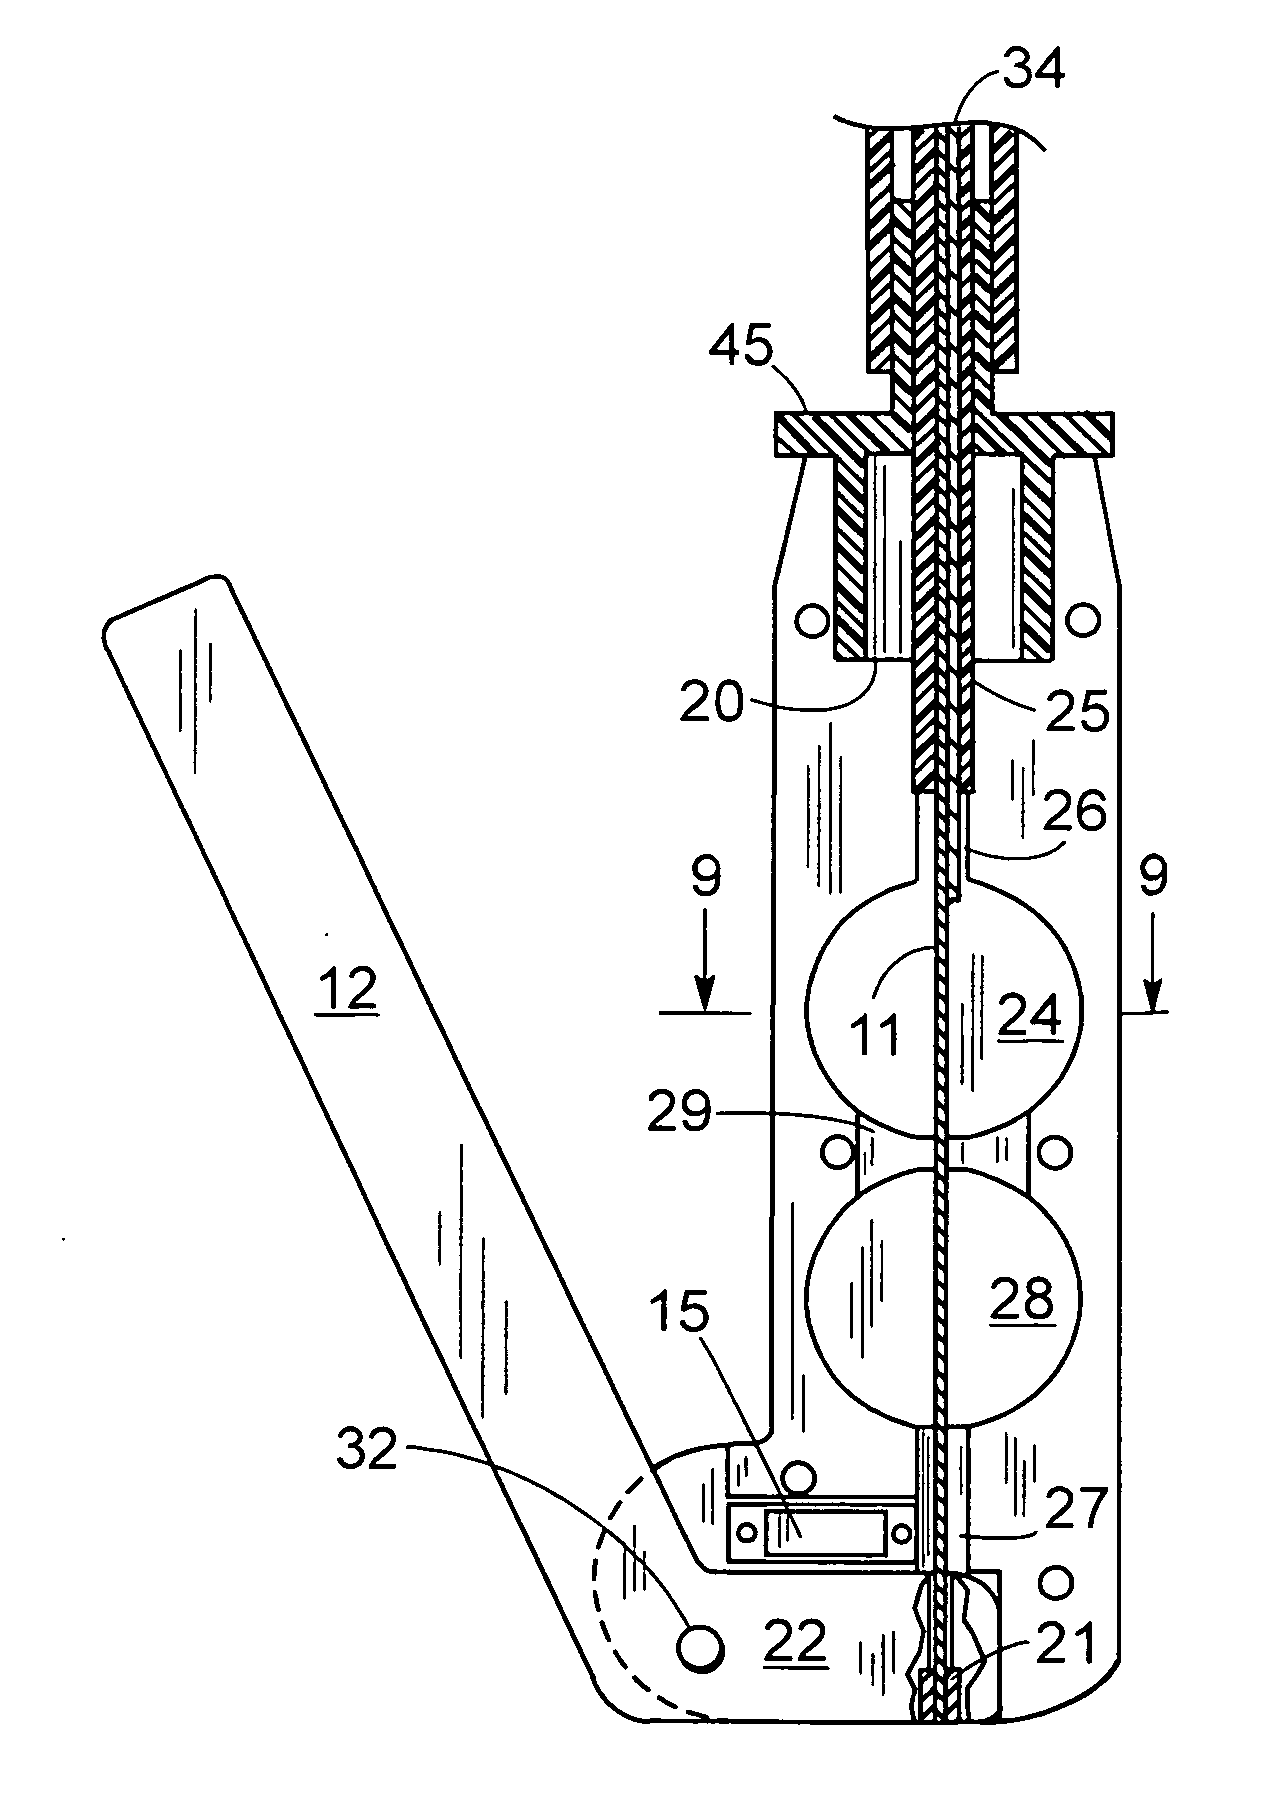 Endo-tracheal intubation device with adjustably bendable stylet